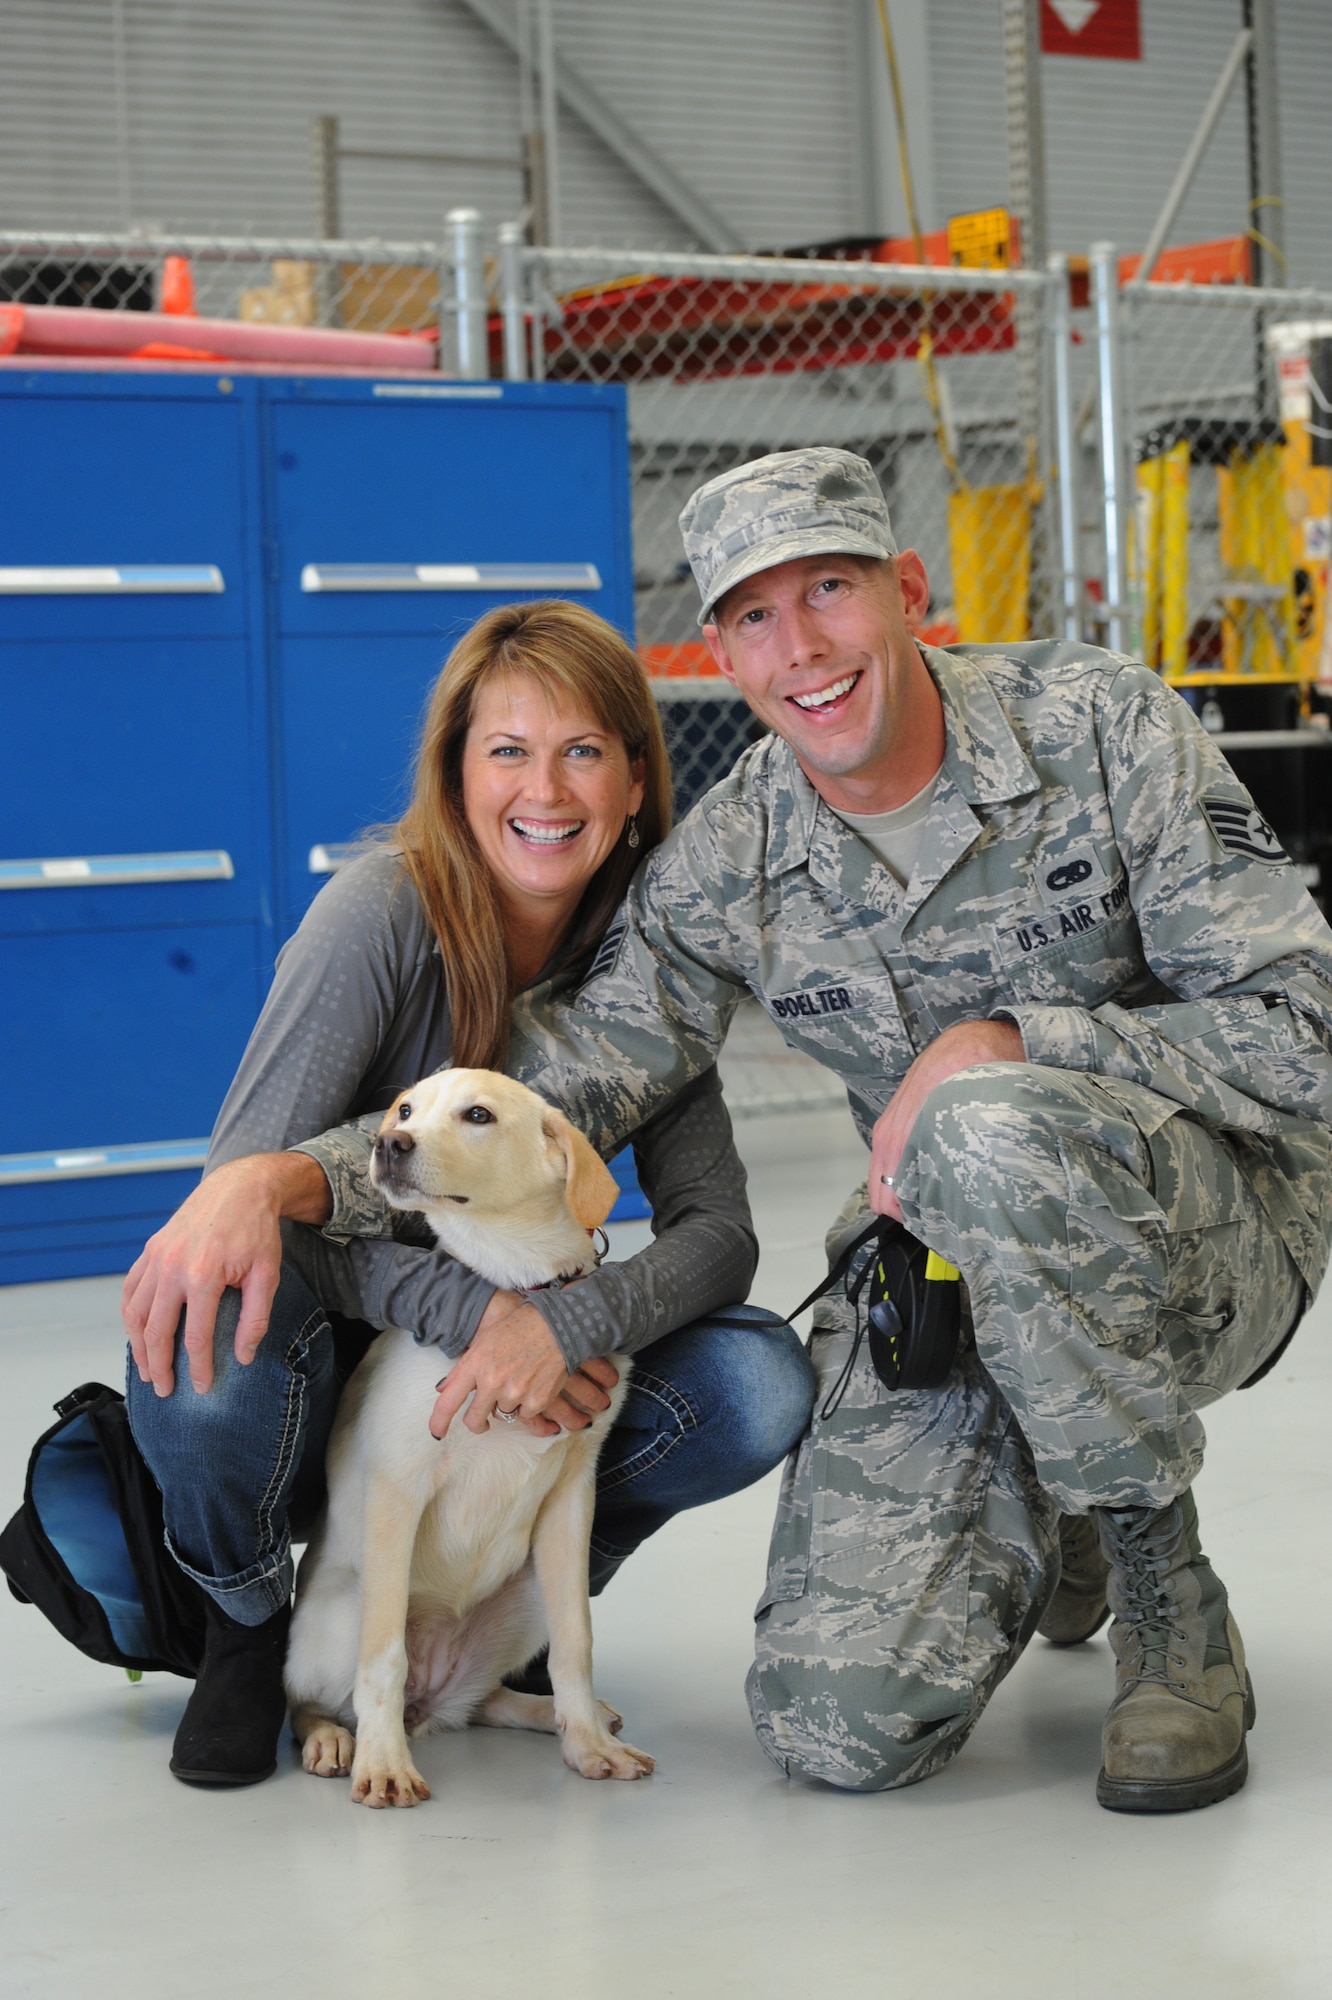 Oregon Air National Guard Staff Sgt. Joshua Boelter along with his wife Sara, pause for a photograph with Luna, a Romania puppy rescued during deployment and reunited, Nov. 5, 2015, Portland Air National Guard Base, Ore. (U.S. Air National Guard photo by Tech. Sgt. John Hughel, 142nd Fighter Wing Public Affairs/Released)